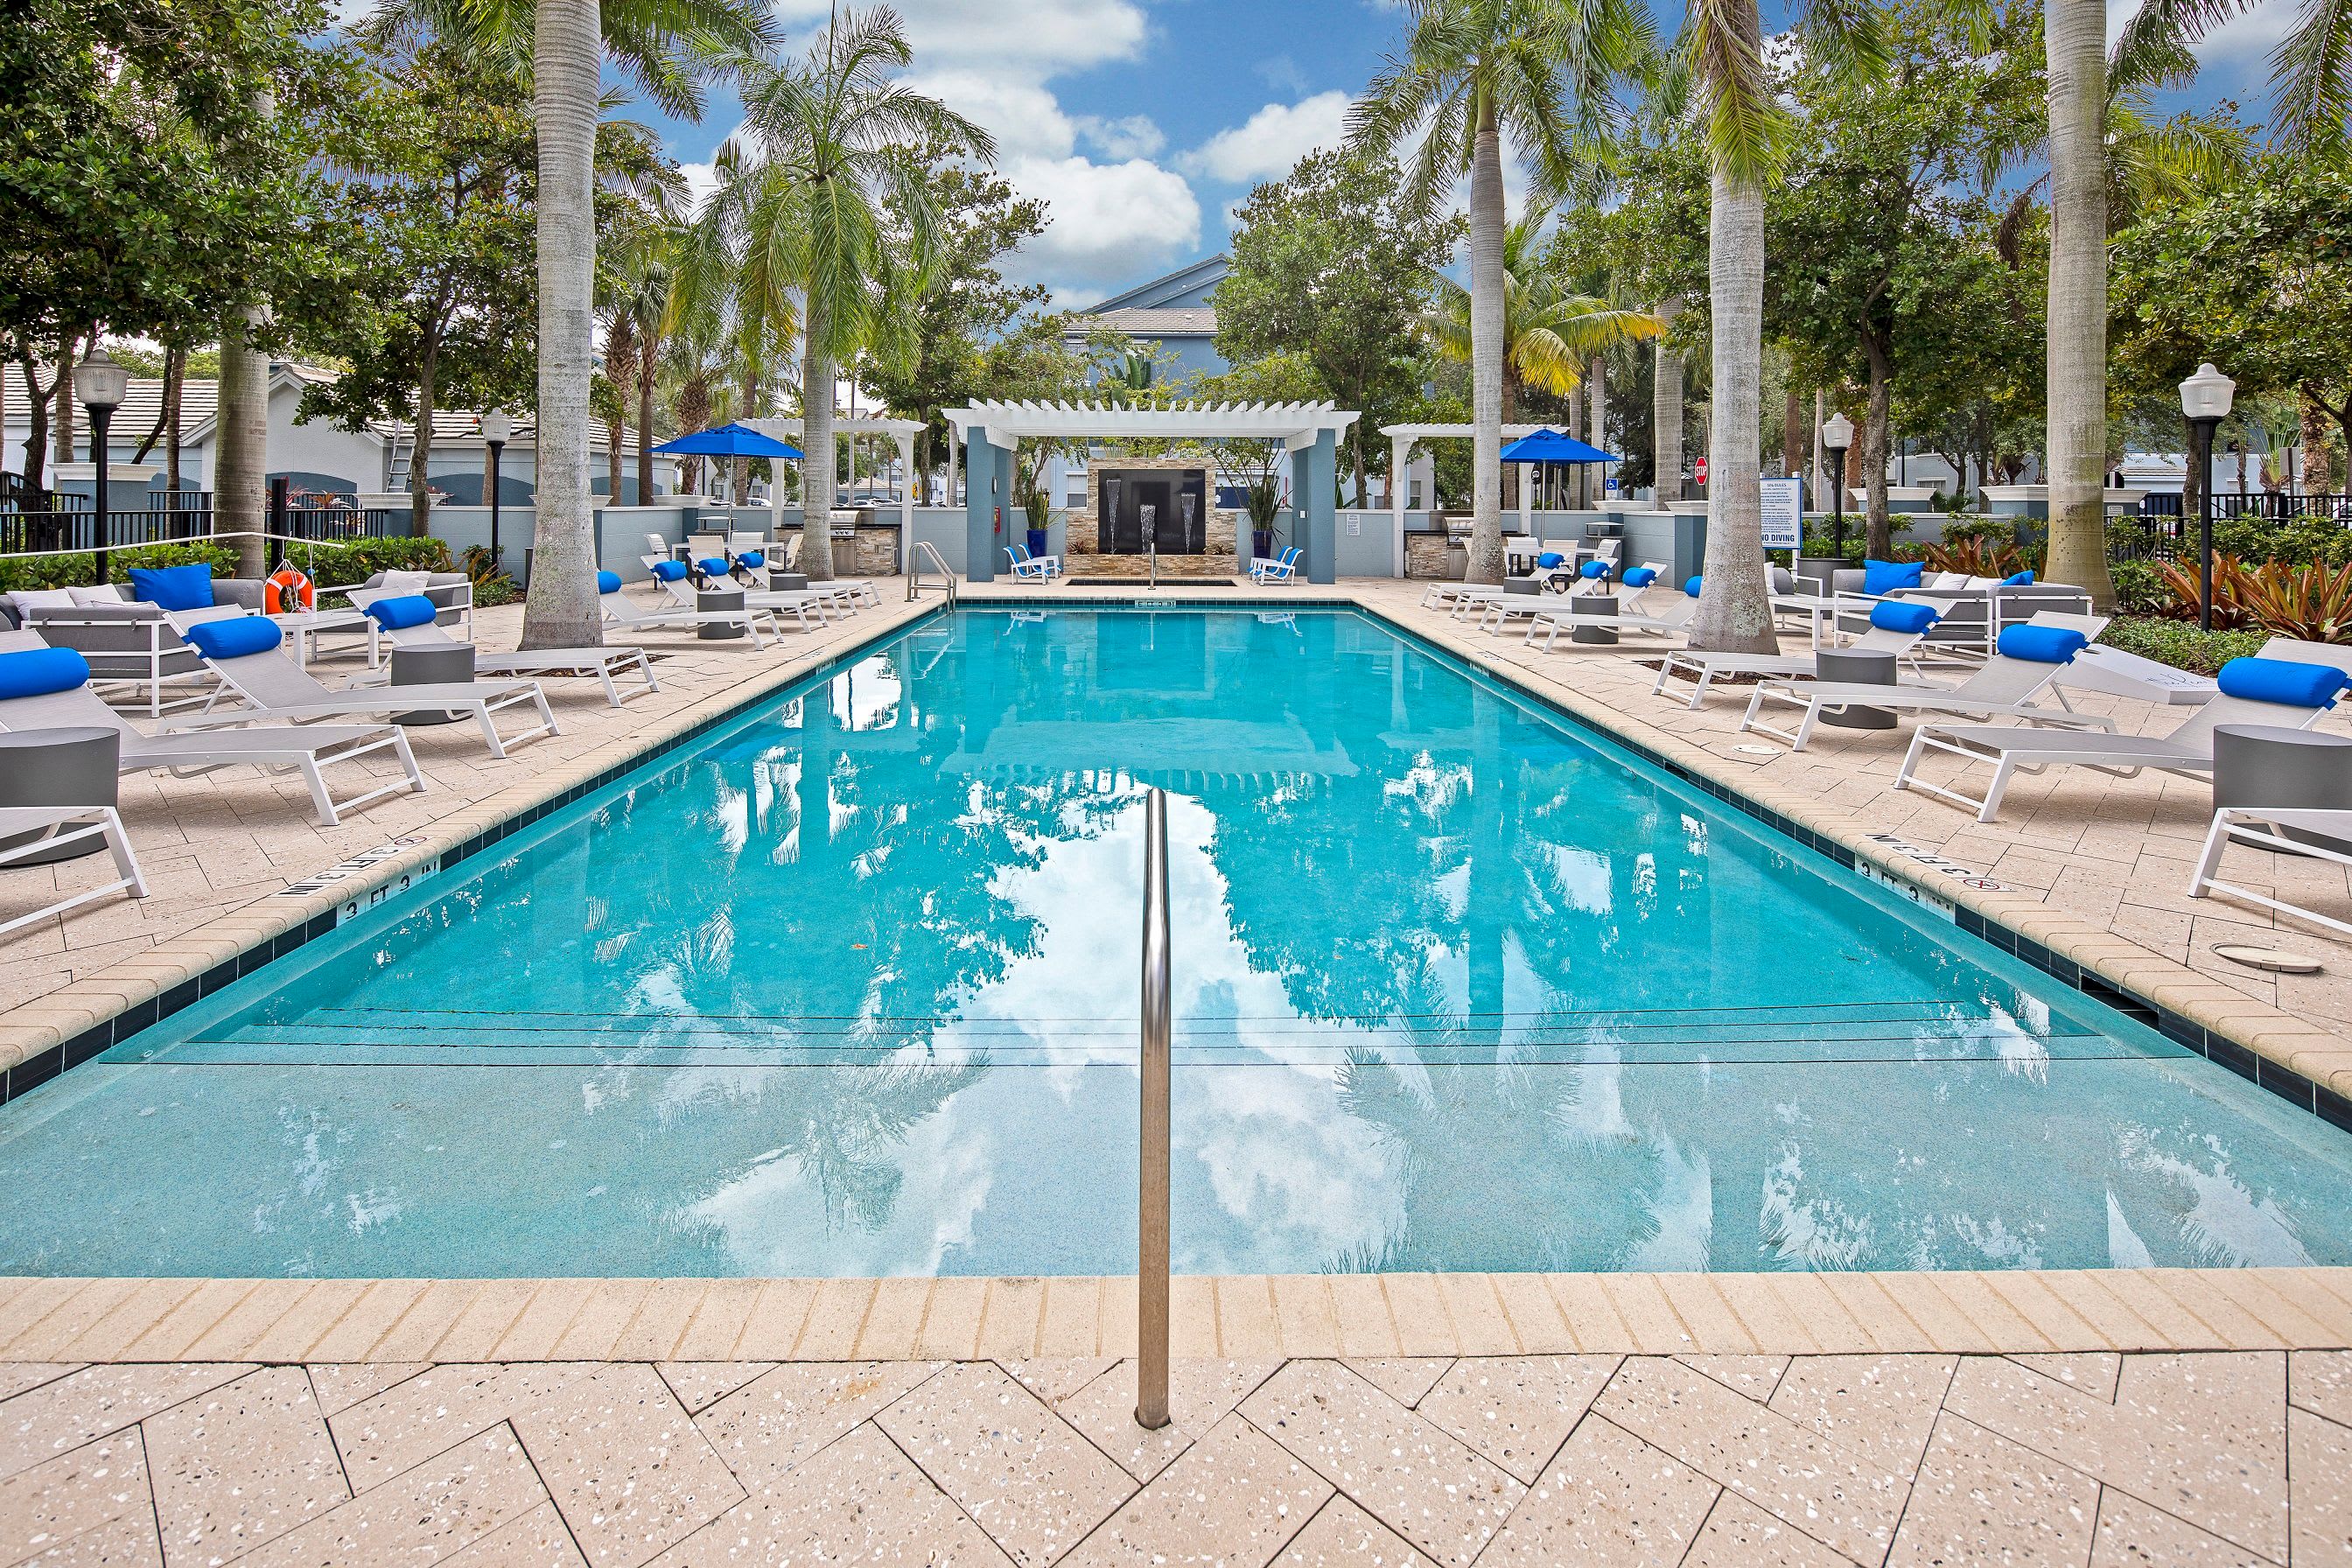 Photos of The Pearl in Ft Lauderdale, Florida